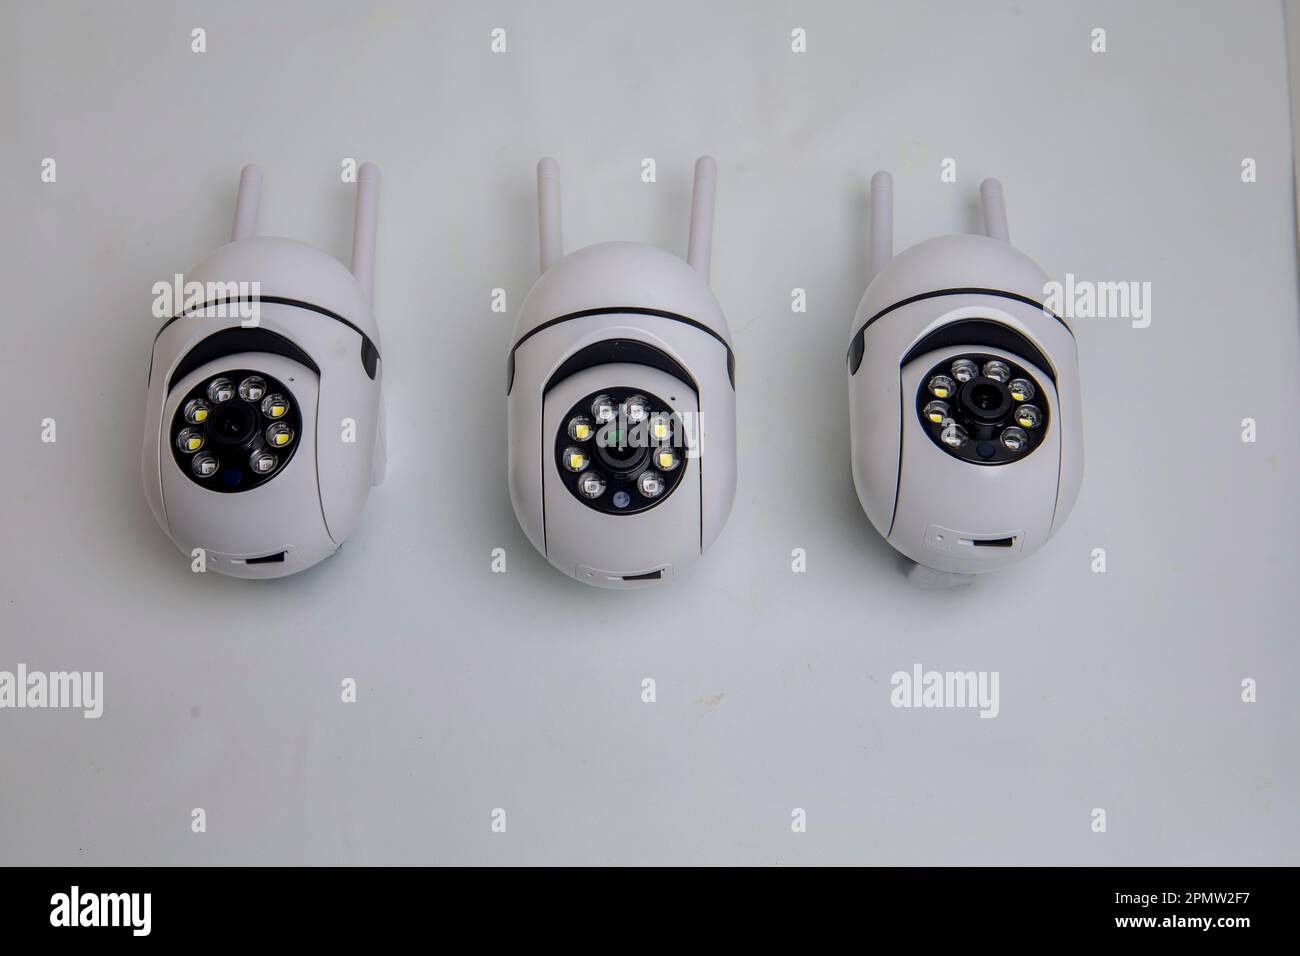 Rotating video surveillance camera on a white background. Stock Photo